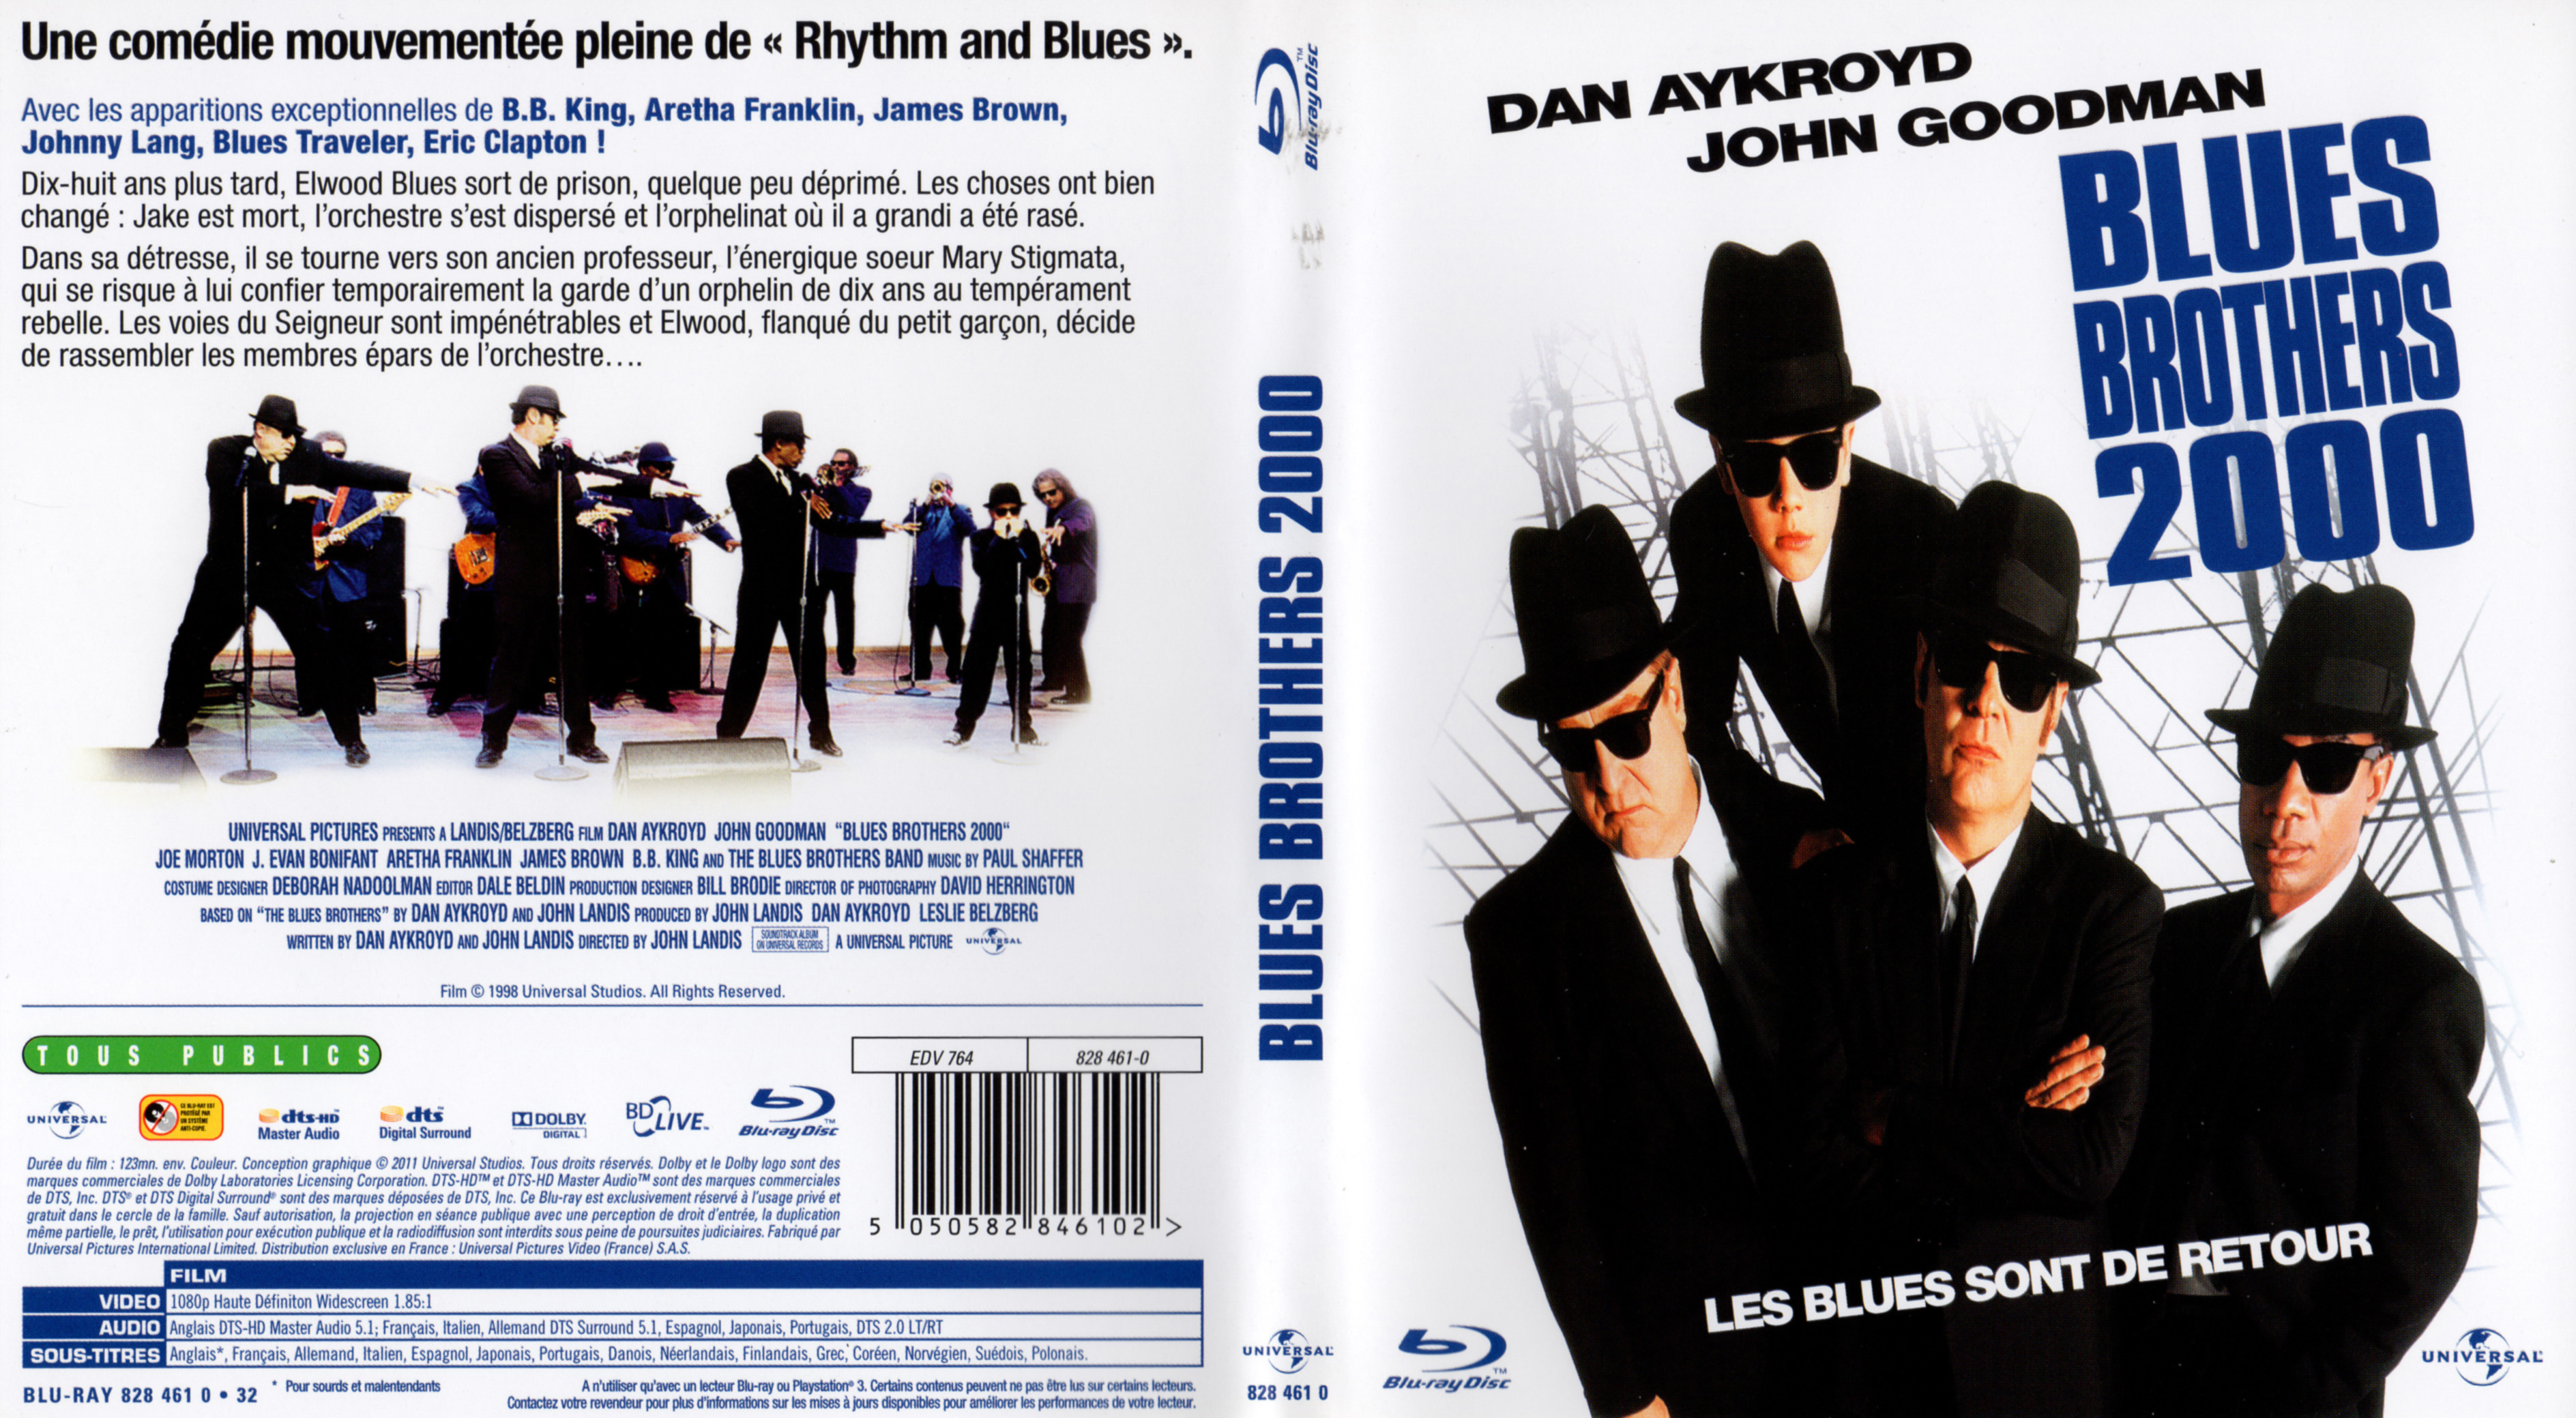 Jaquette DVD Blues Brothers 2000 (BLU-RAY)